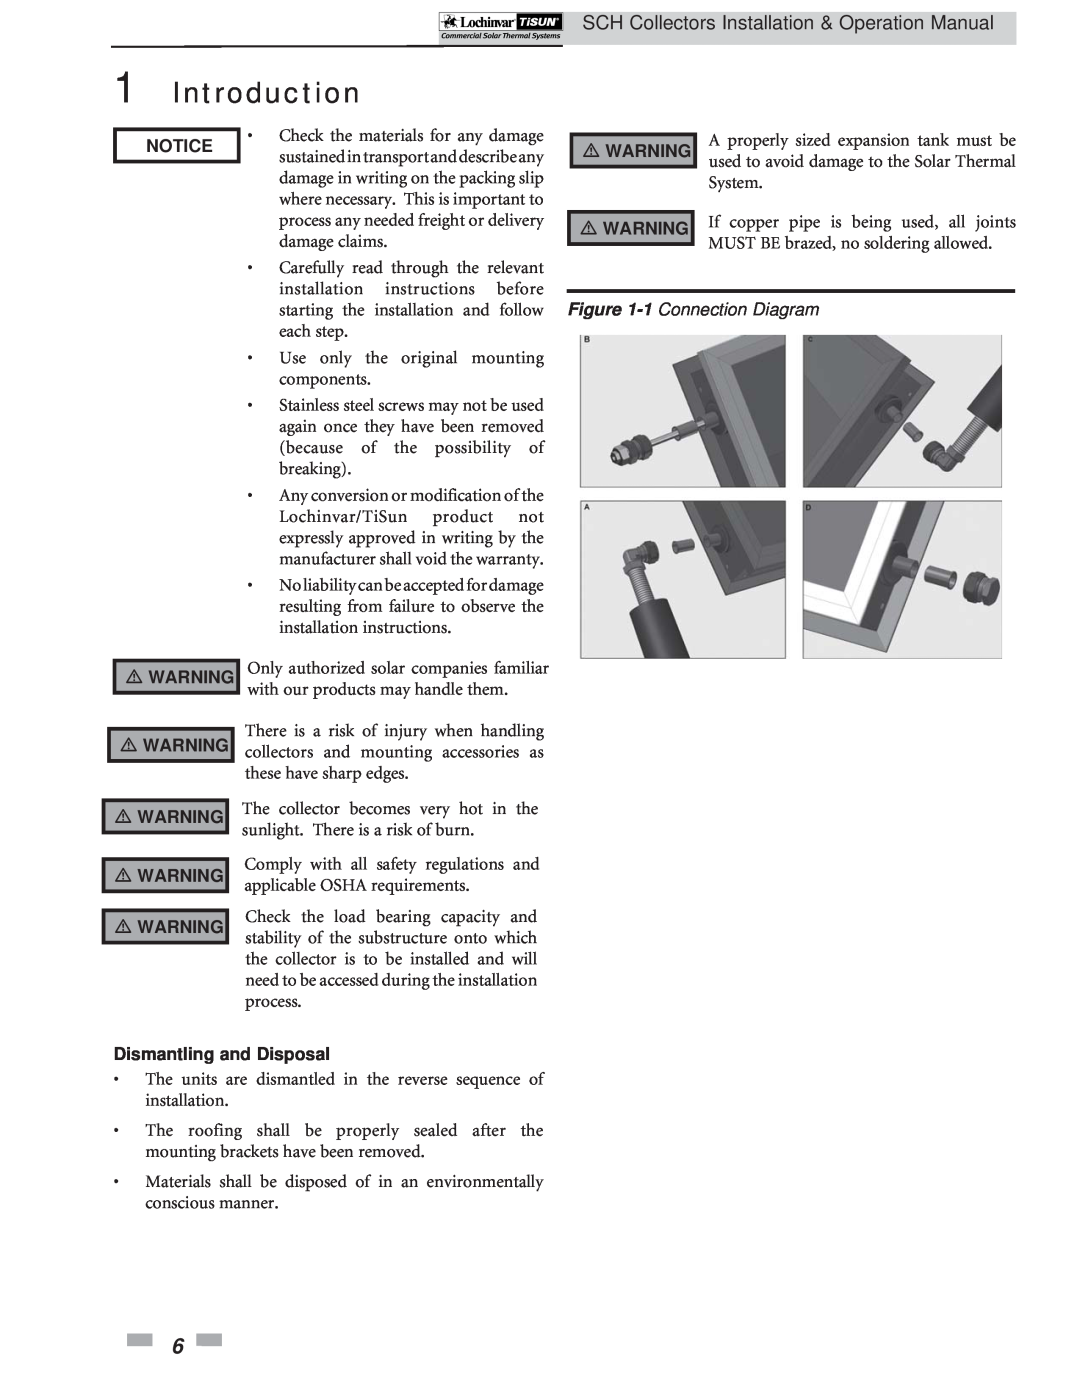 Lochinvar SCH-I-O operation manual 1 Connection Diagram, Introduction, Dismantling and Disposal 